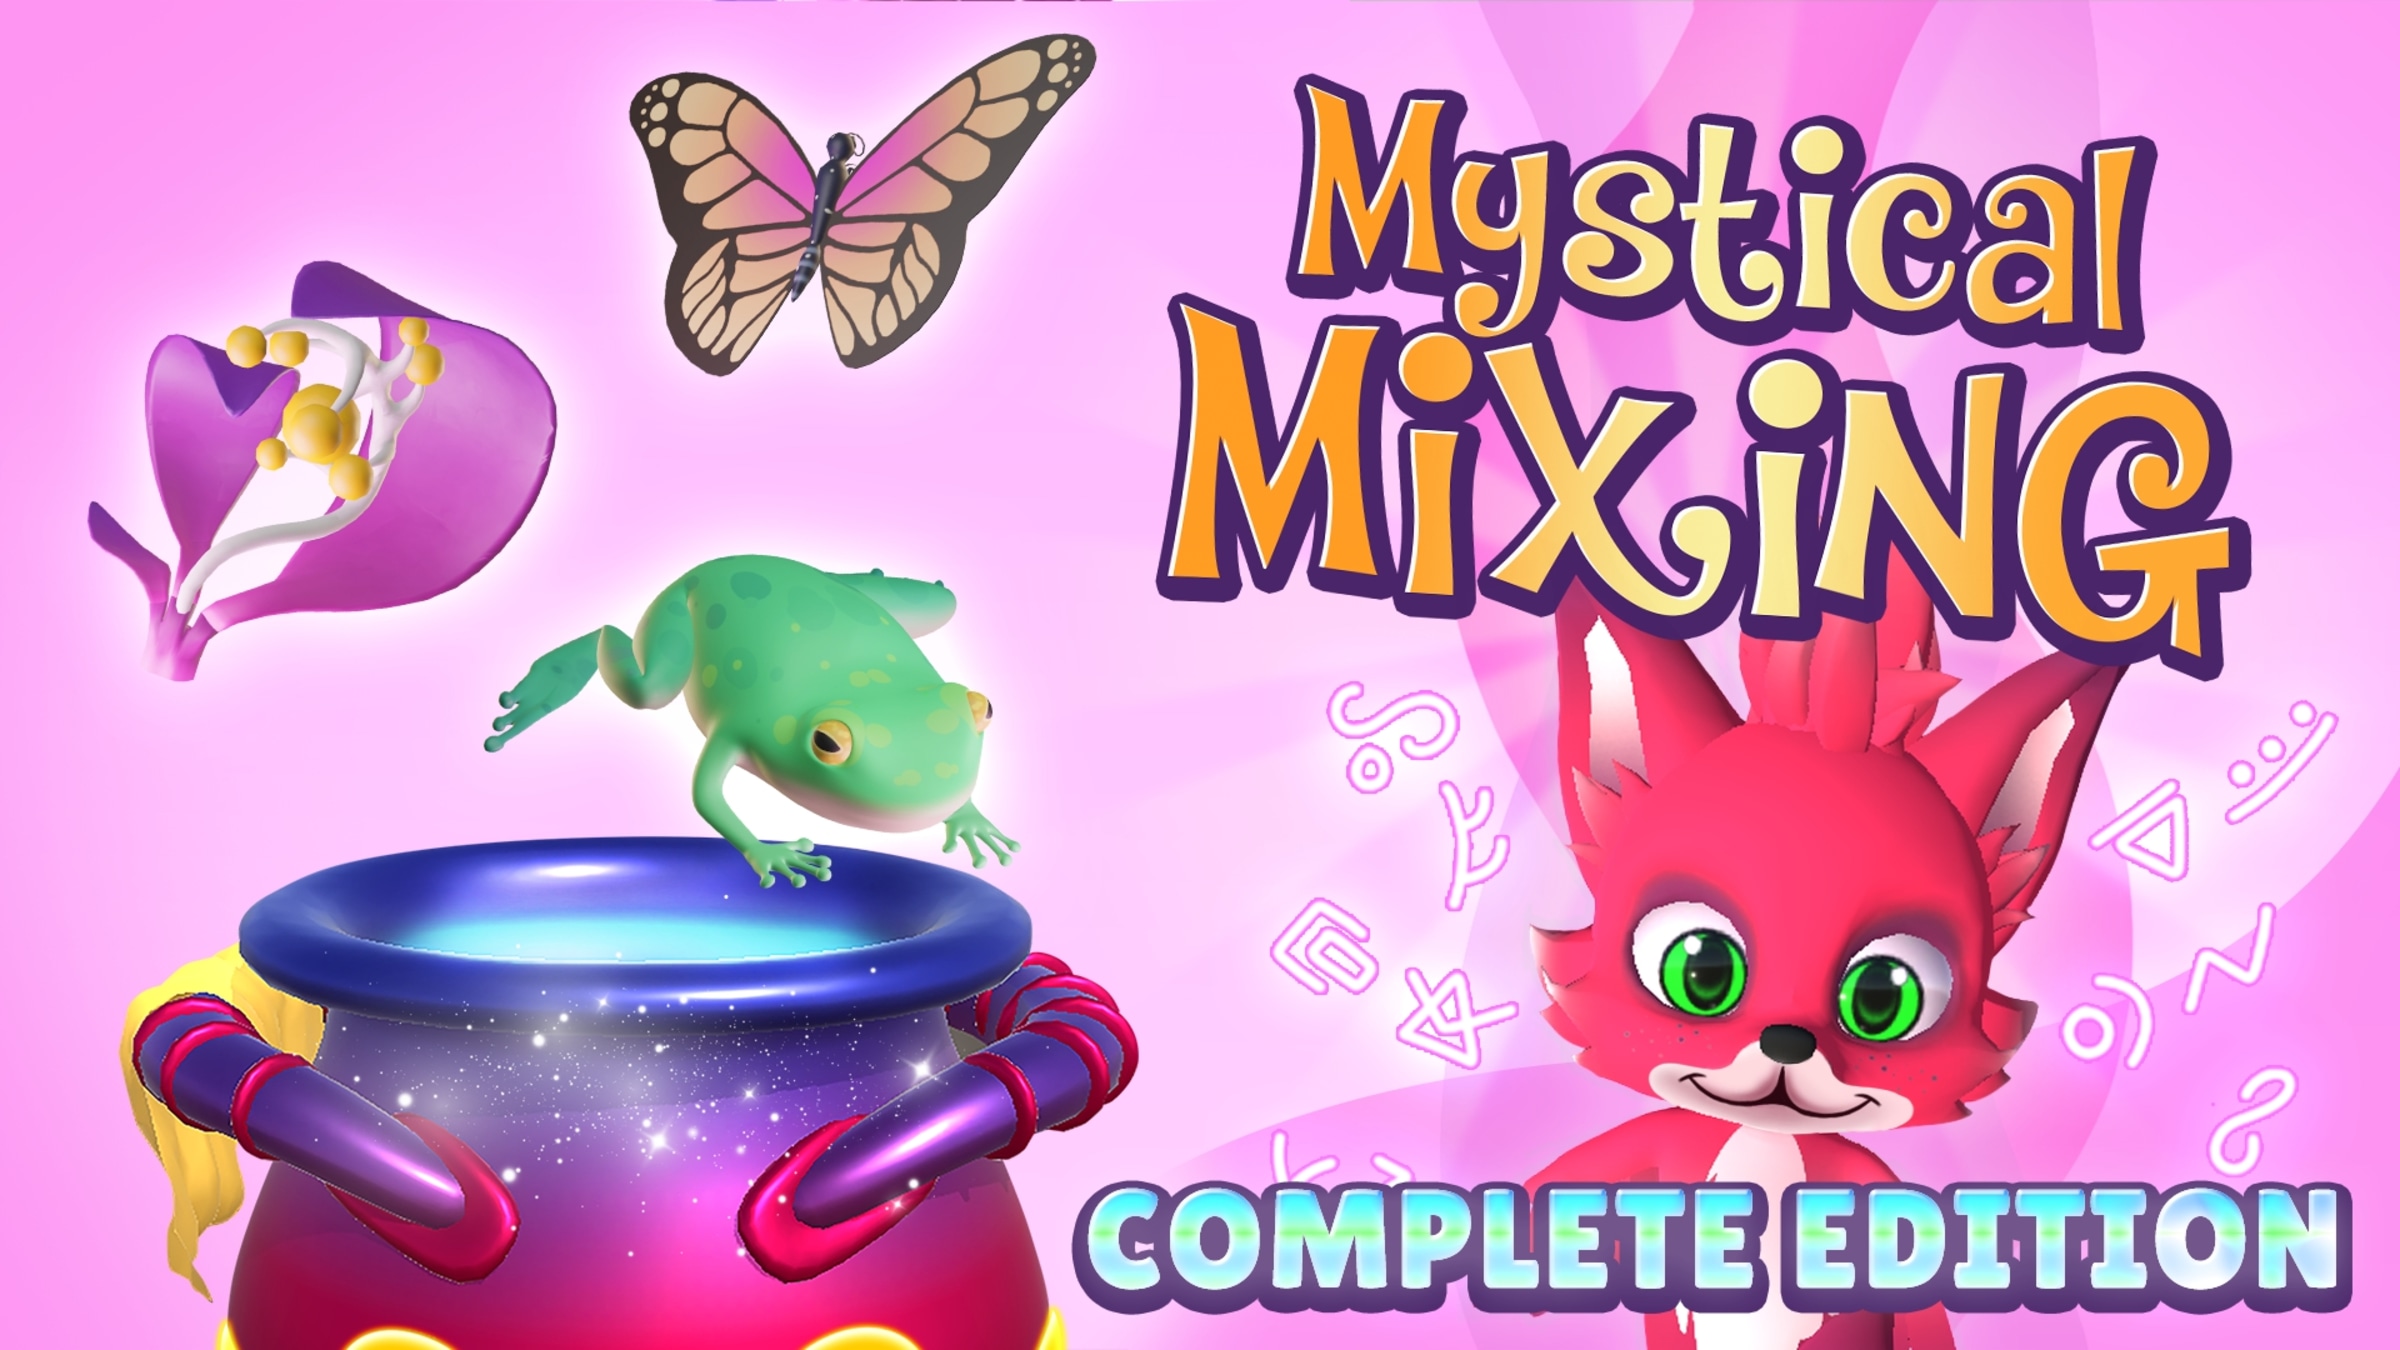 Buy Mystical Mixing Wand and Frog Nintendo Switch Compare Prices